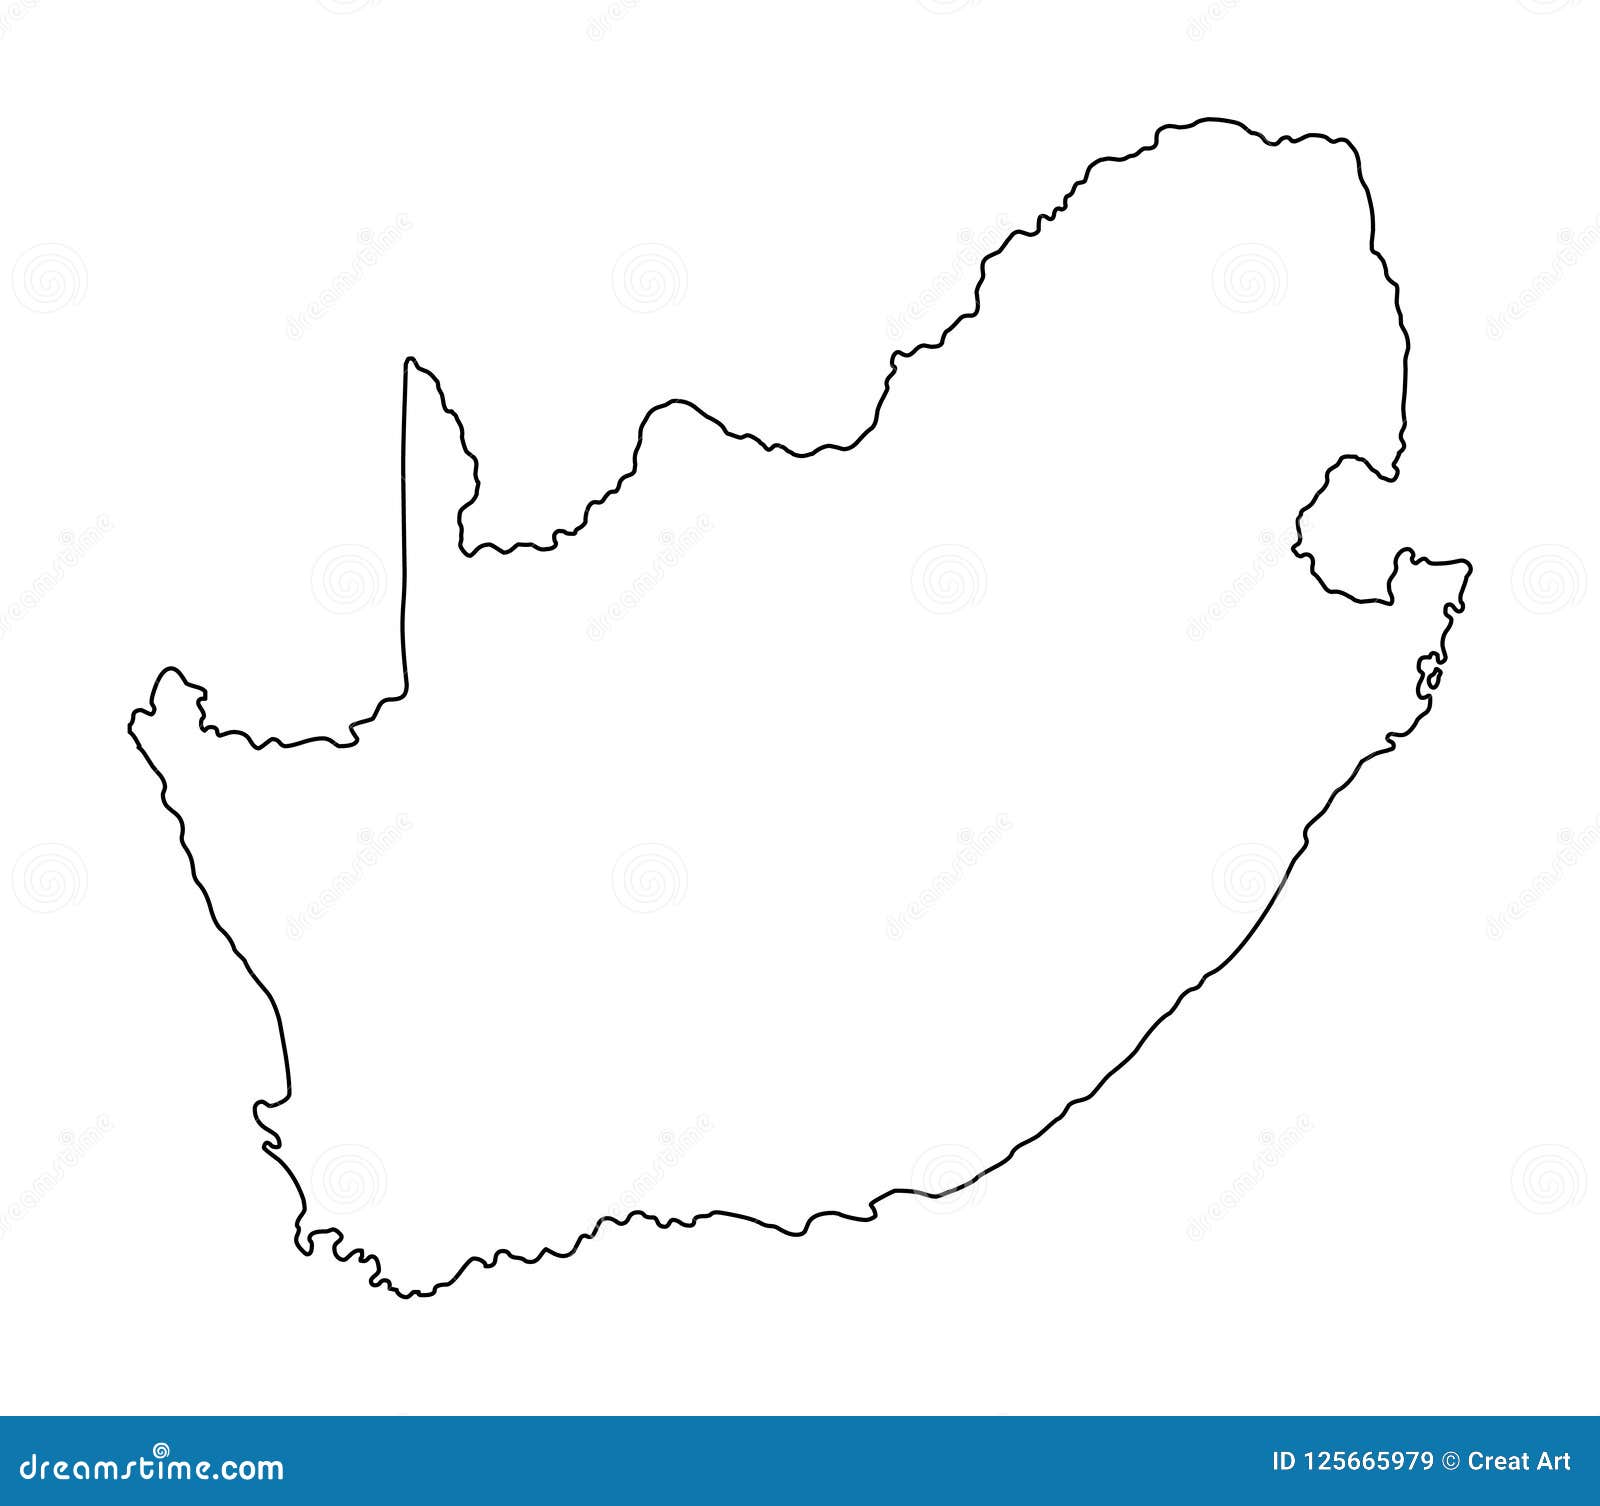 South Africa Map Outline Vector Illustration Stock Vector